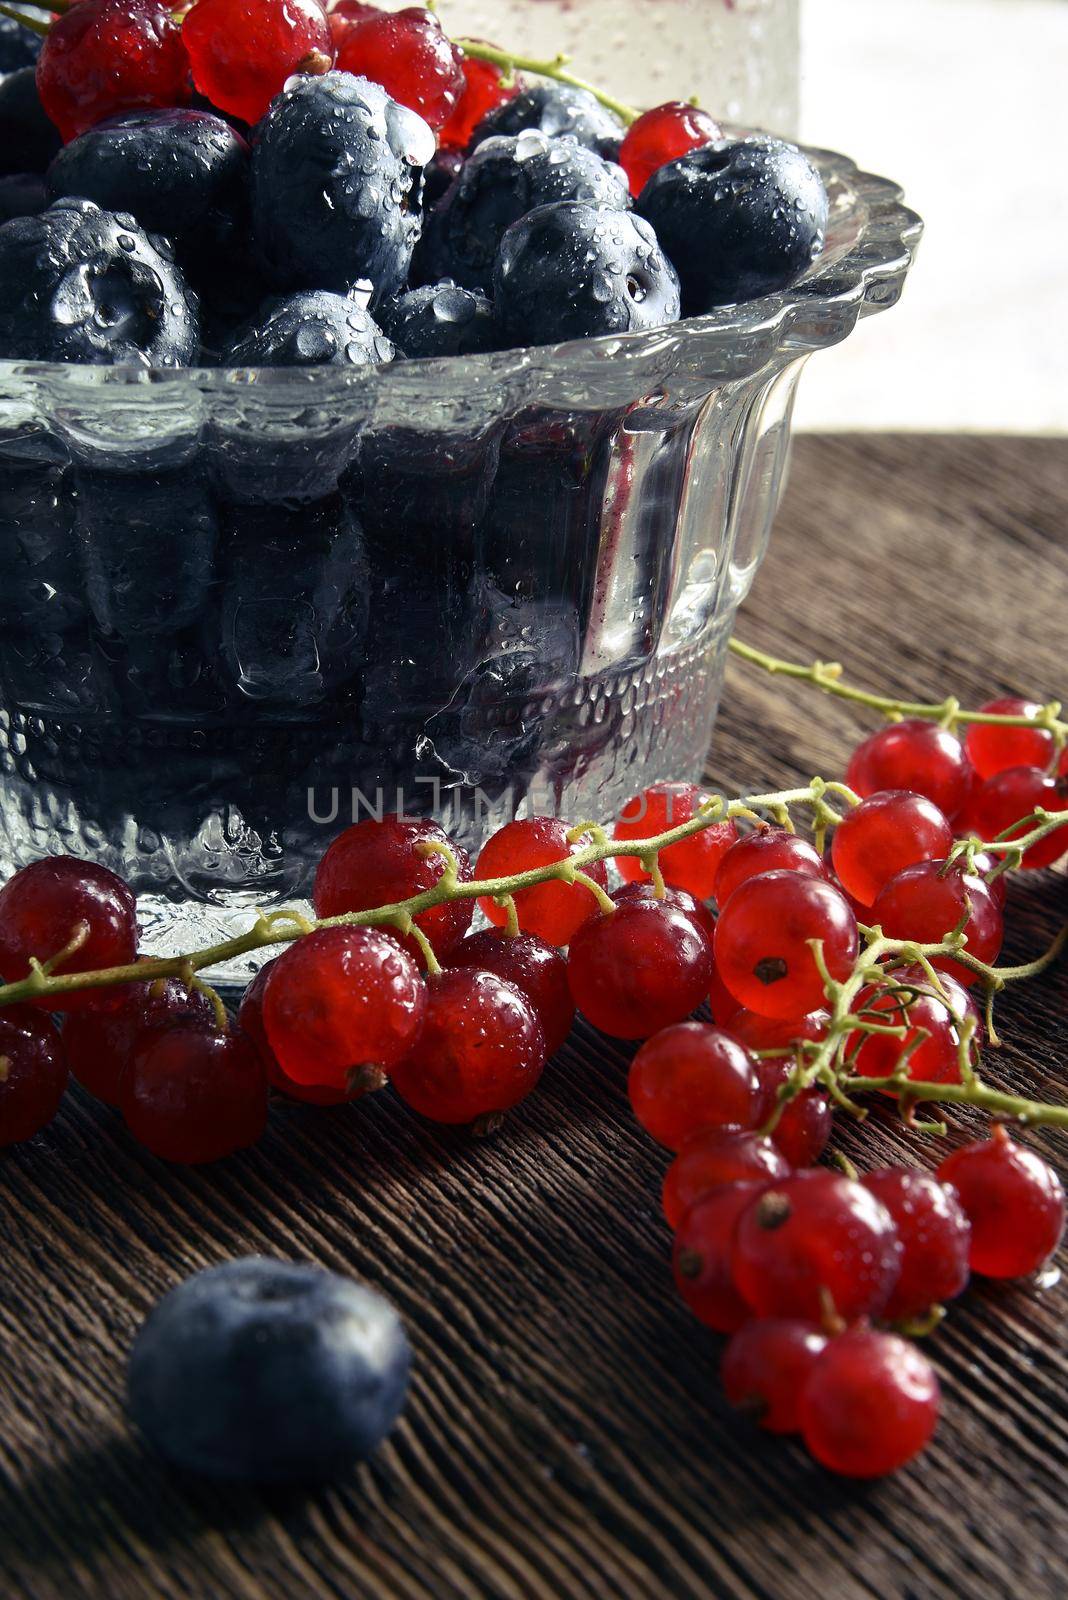 Blueberries and currants in a vase. Water drops